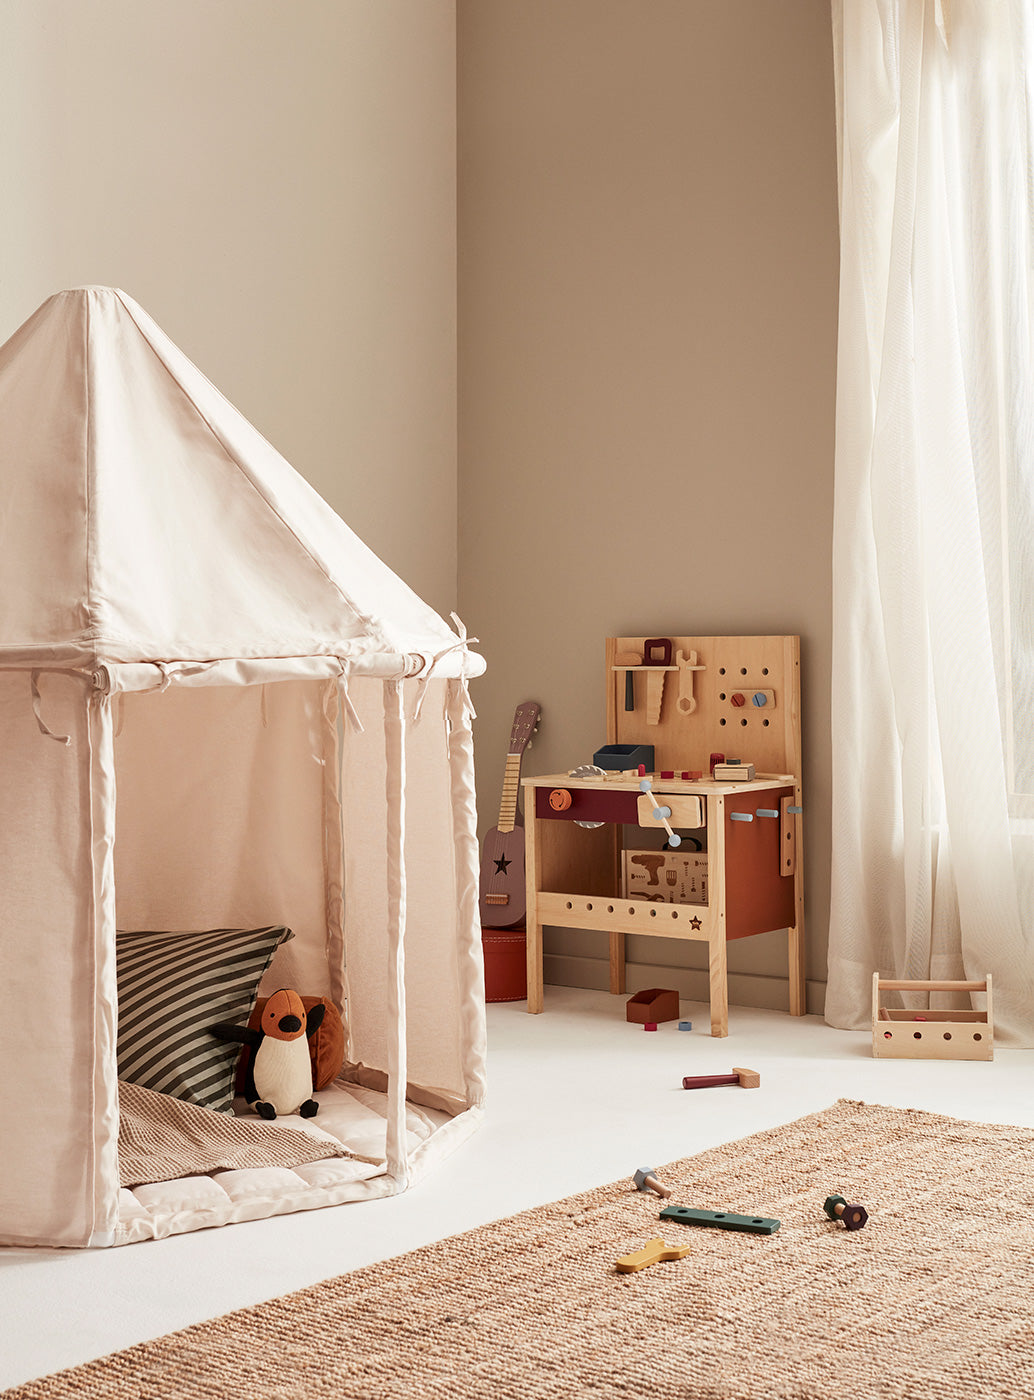 Kid's Concept - Pavilion Play Tent Off White - All Mamas Children